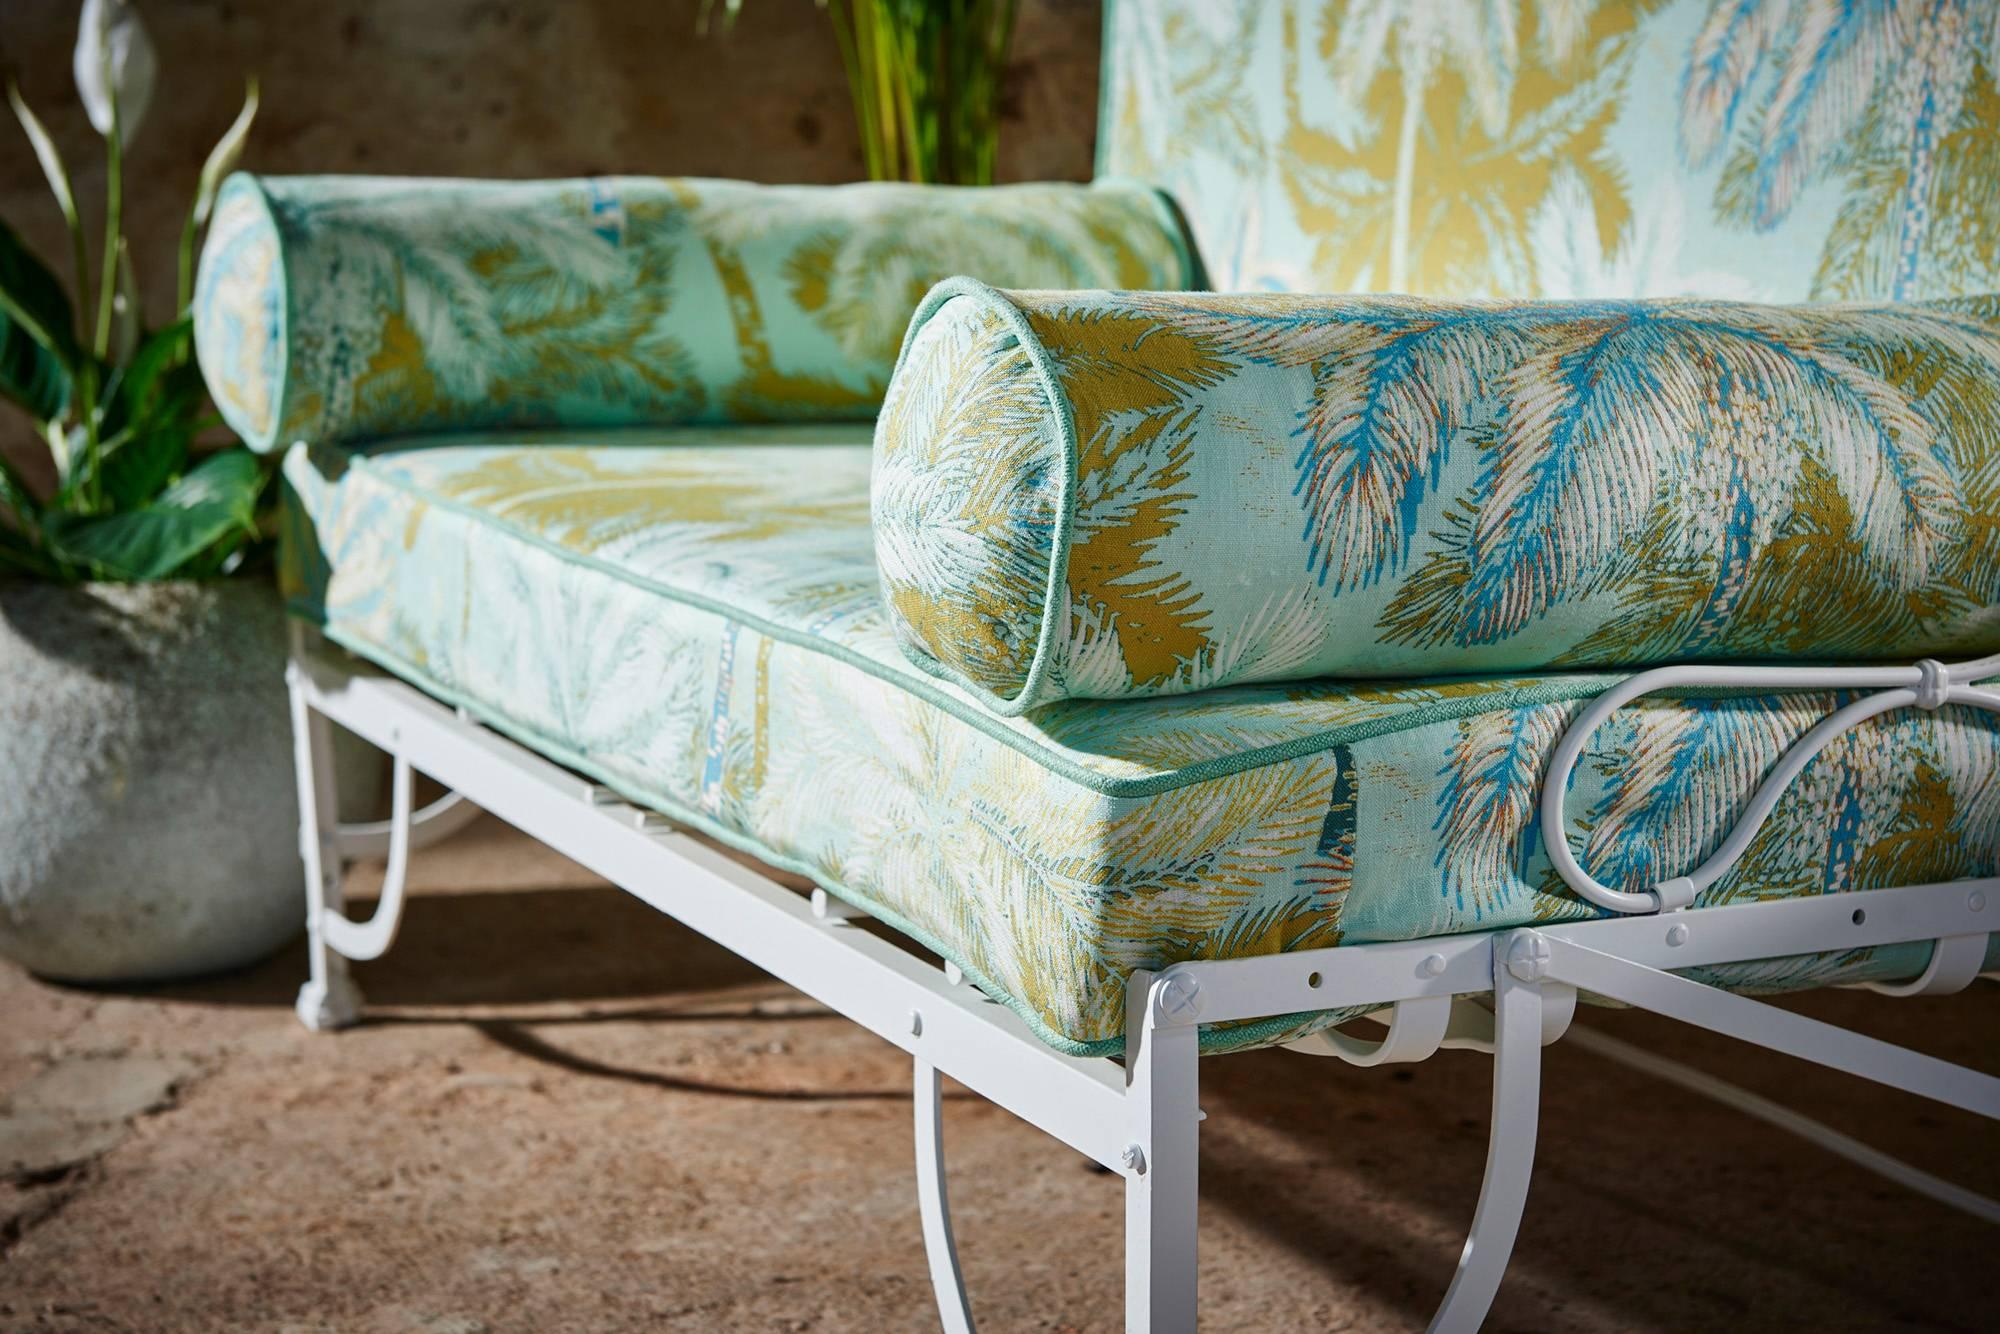 A beautiful retro 1960s daybed, perfect for the conservatory or garden room.

This chic French daybed is so comfortable, and is light enough to be easily moved between garden and indoors. We've added new fireproof cushioning, upholstered with a